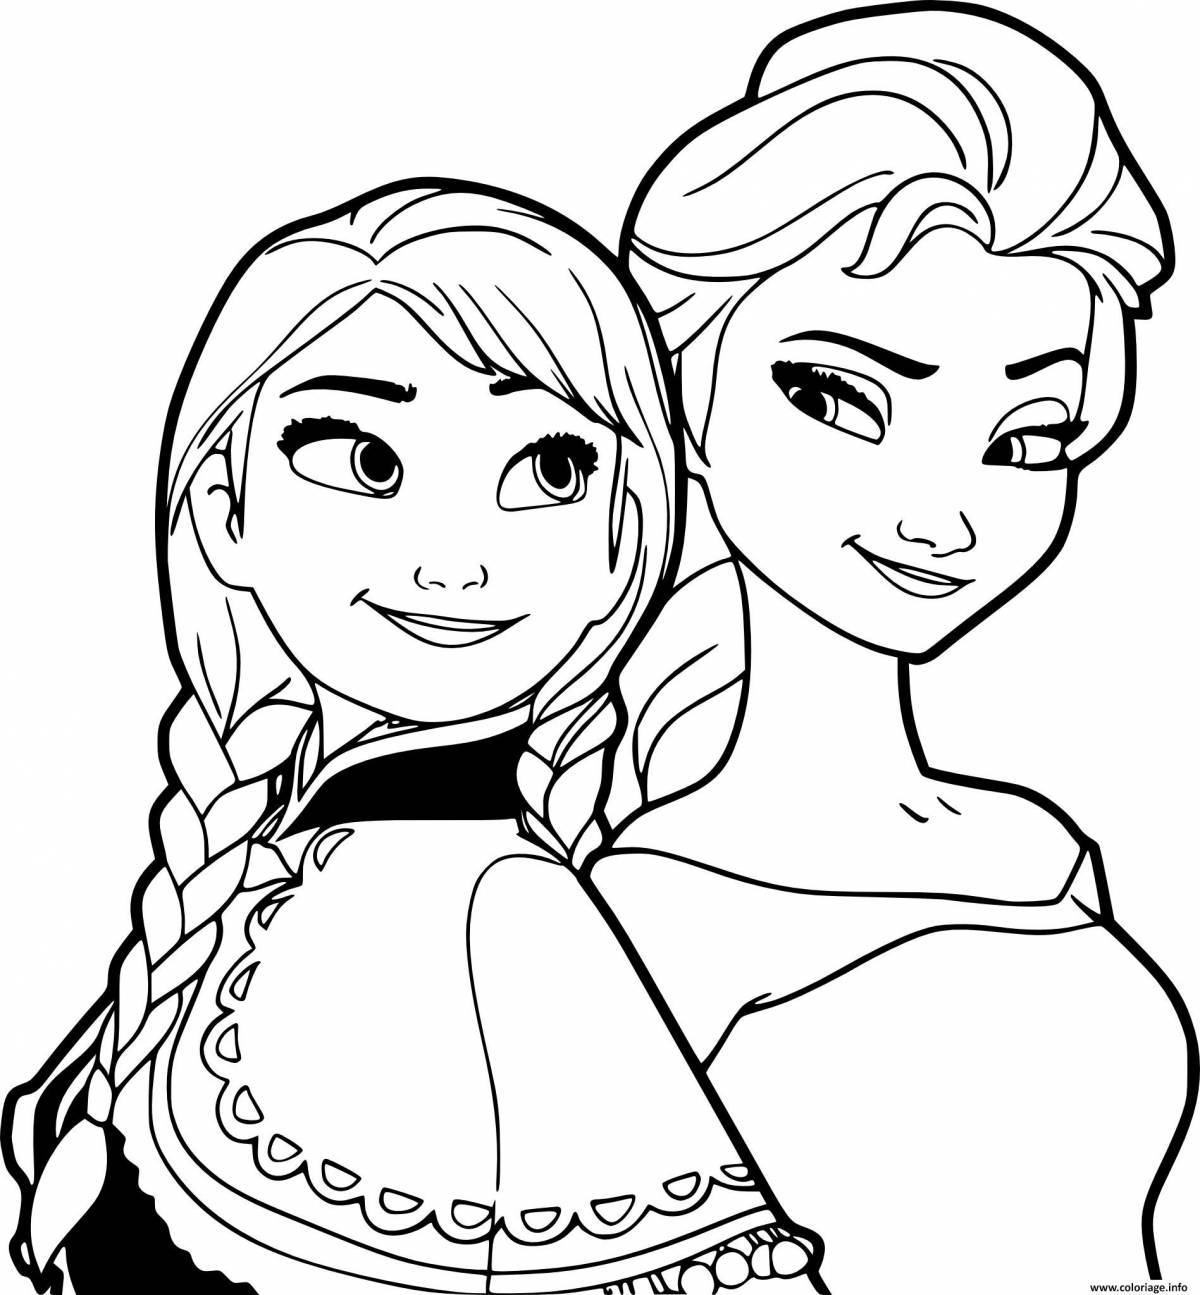 Fantastic elsa and anna coloring book for kids